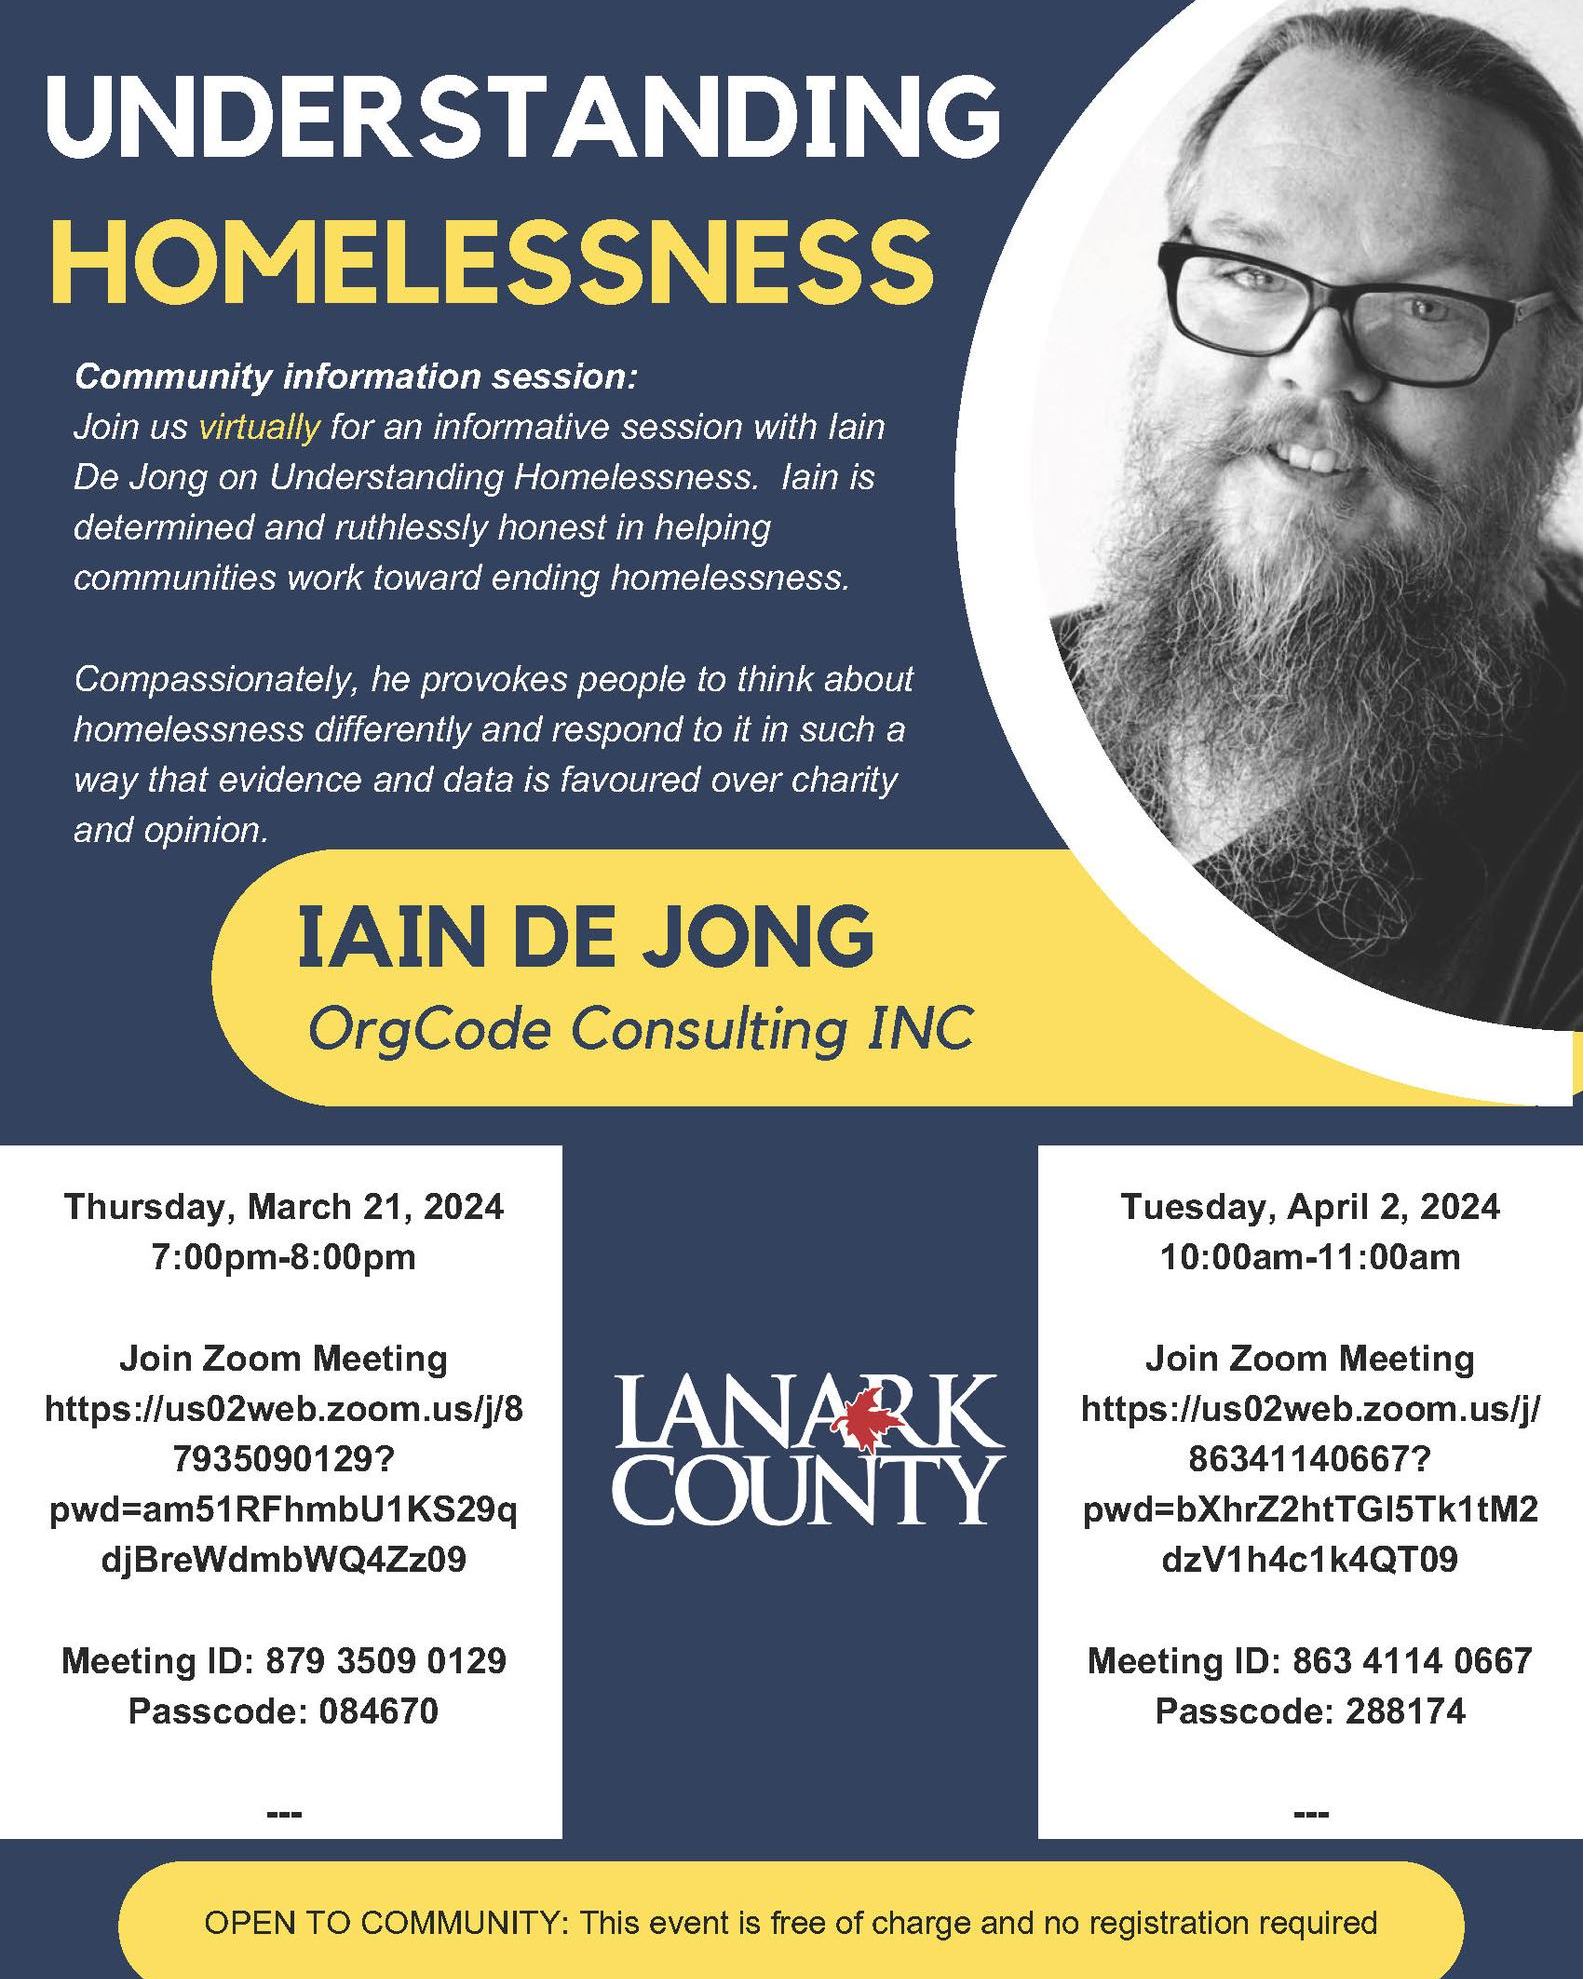 Poster advertising free virtual public education sessions on homelessness featuring a black and white headshot of a man